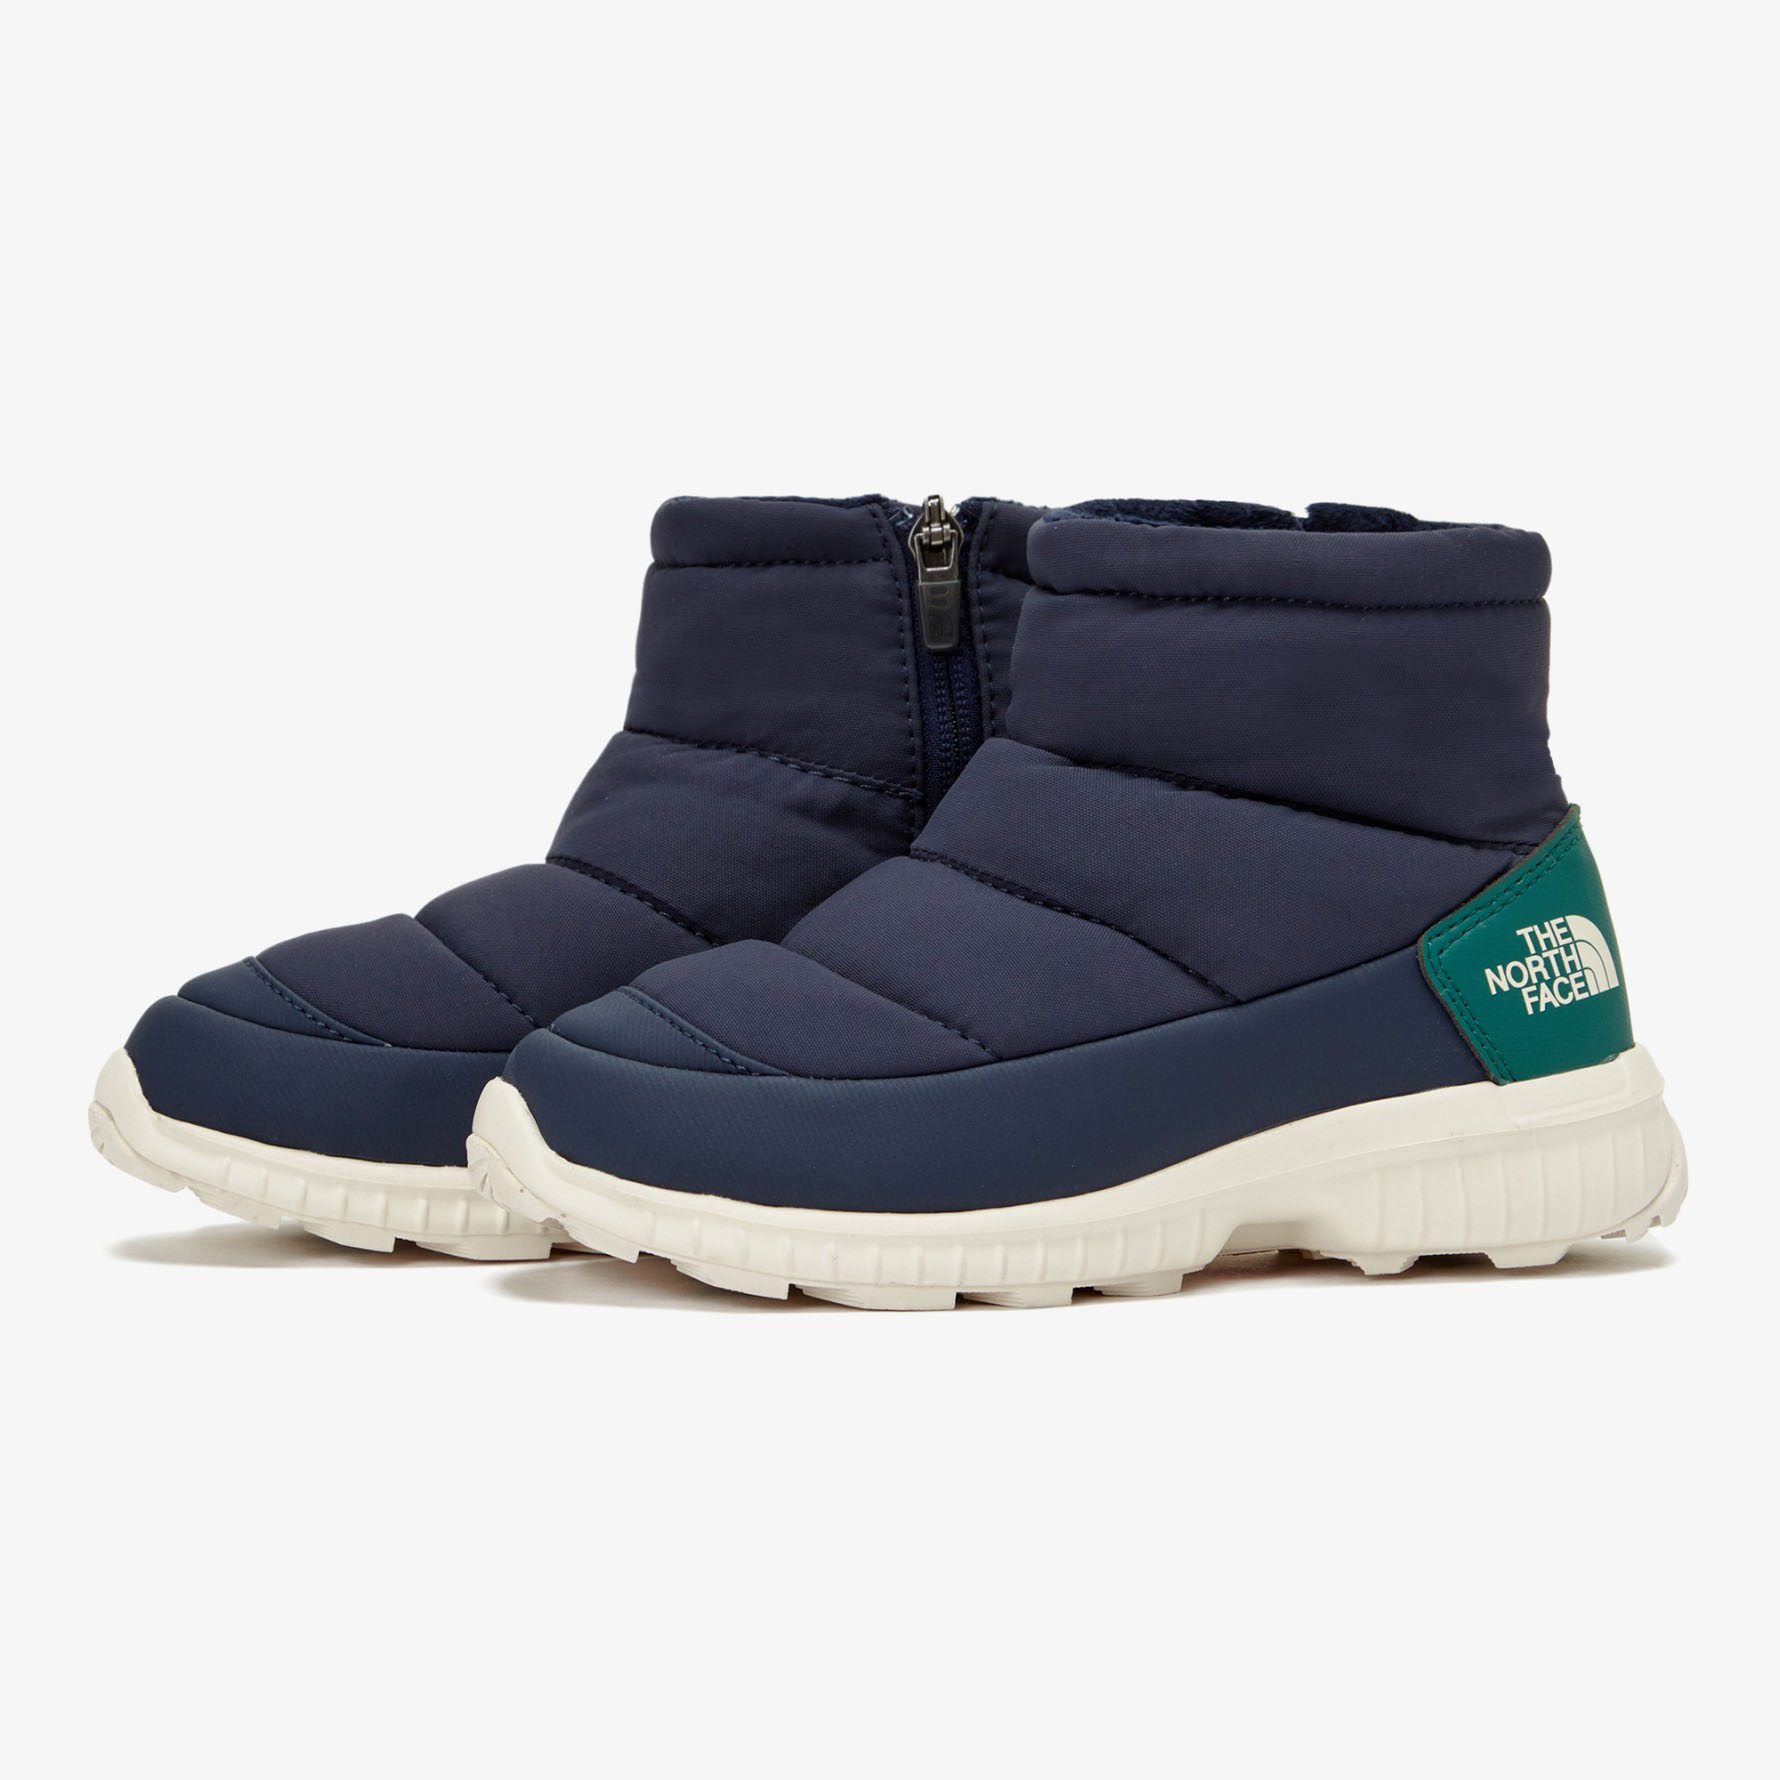 THE NORTH FACE ノースフェイス キッズ ショートブーツ KIDS BOOTIE SHO...